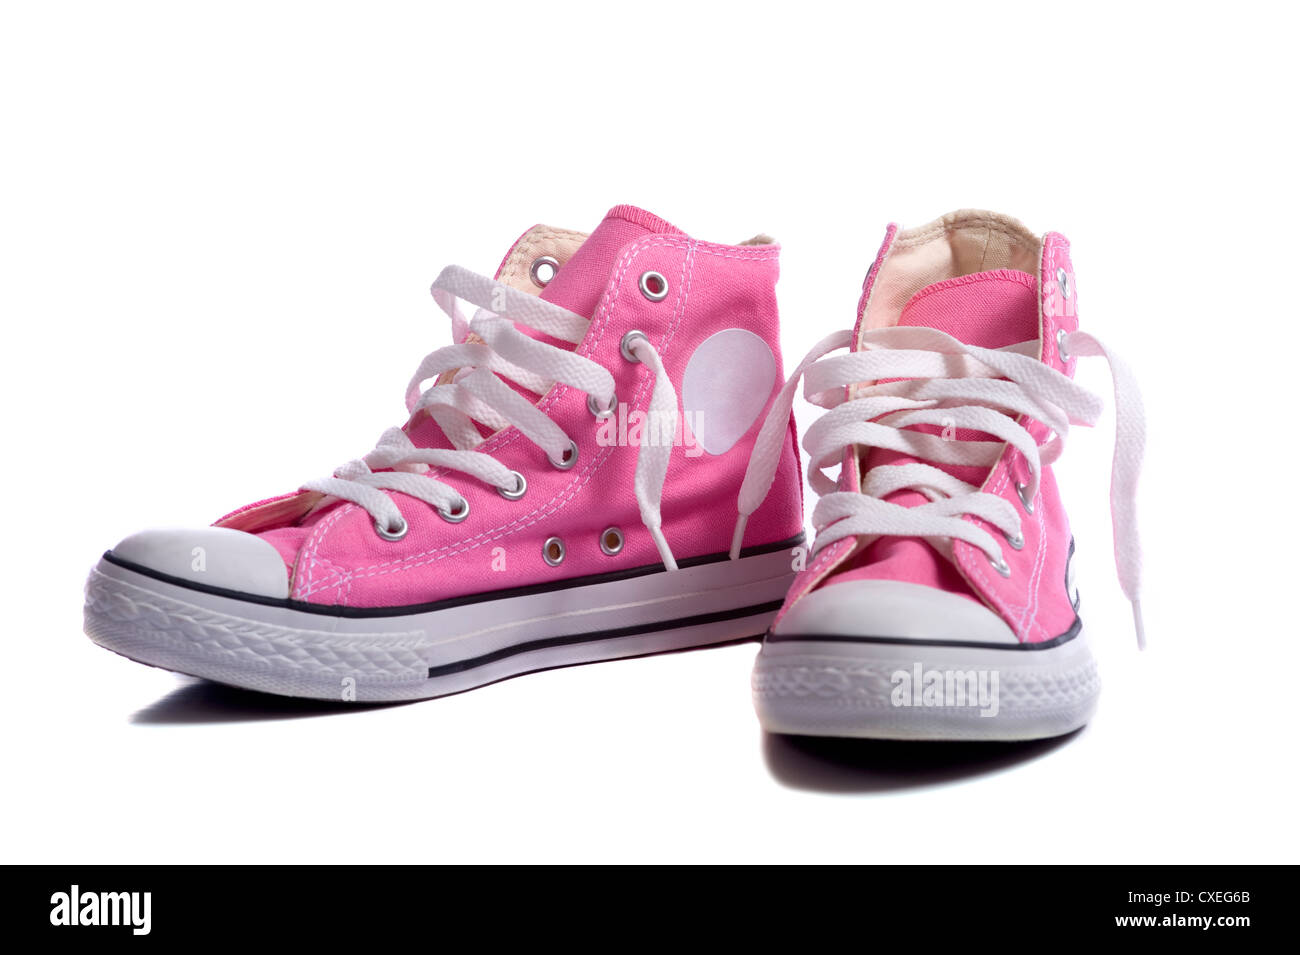 A pair of pink sneakers or basketball shoes on a white background Stock Photo